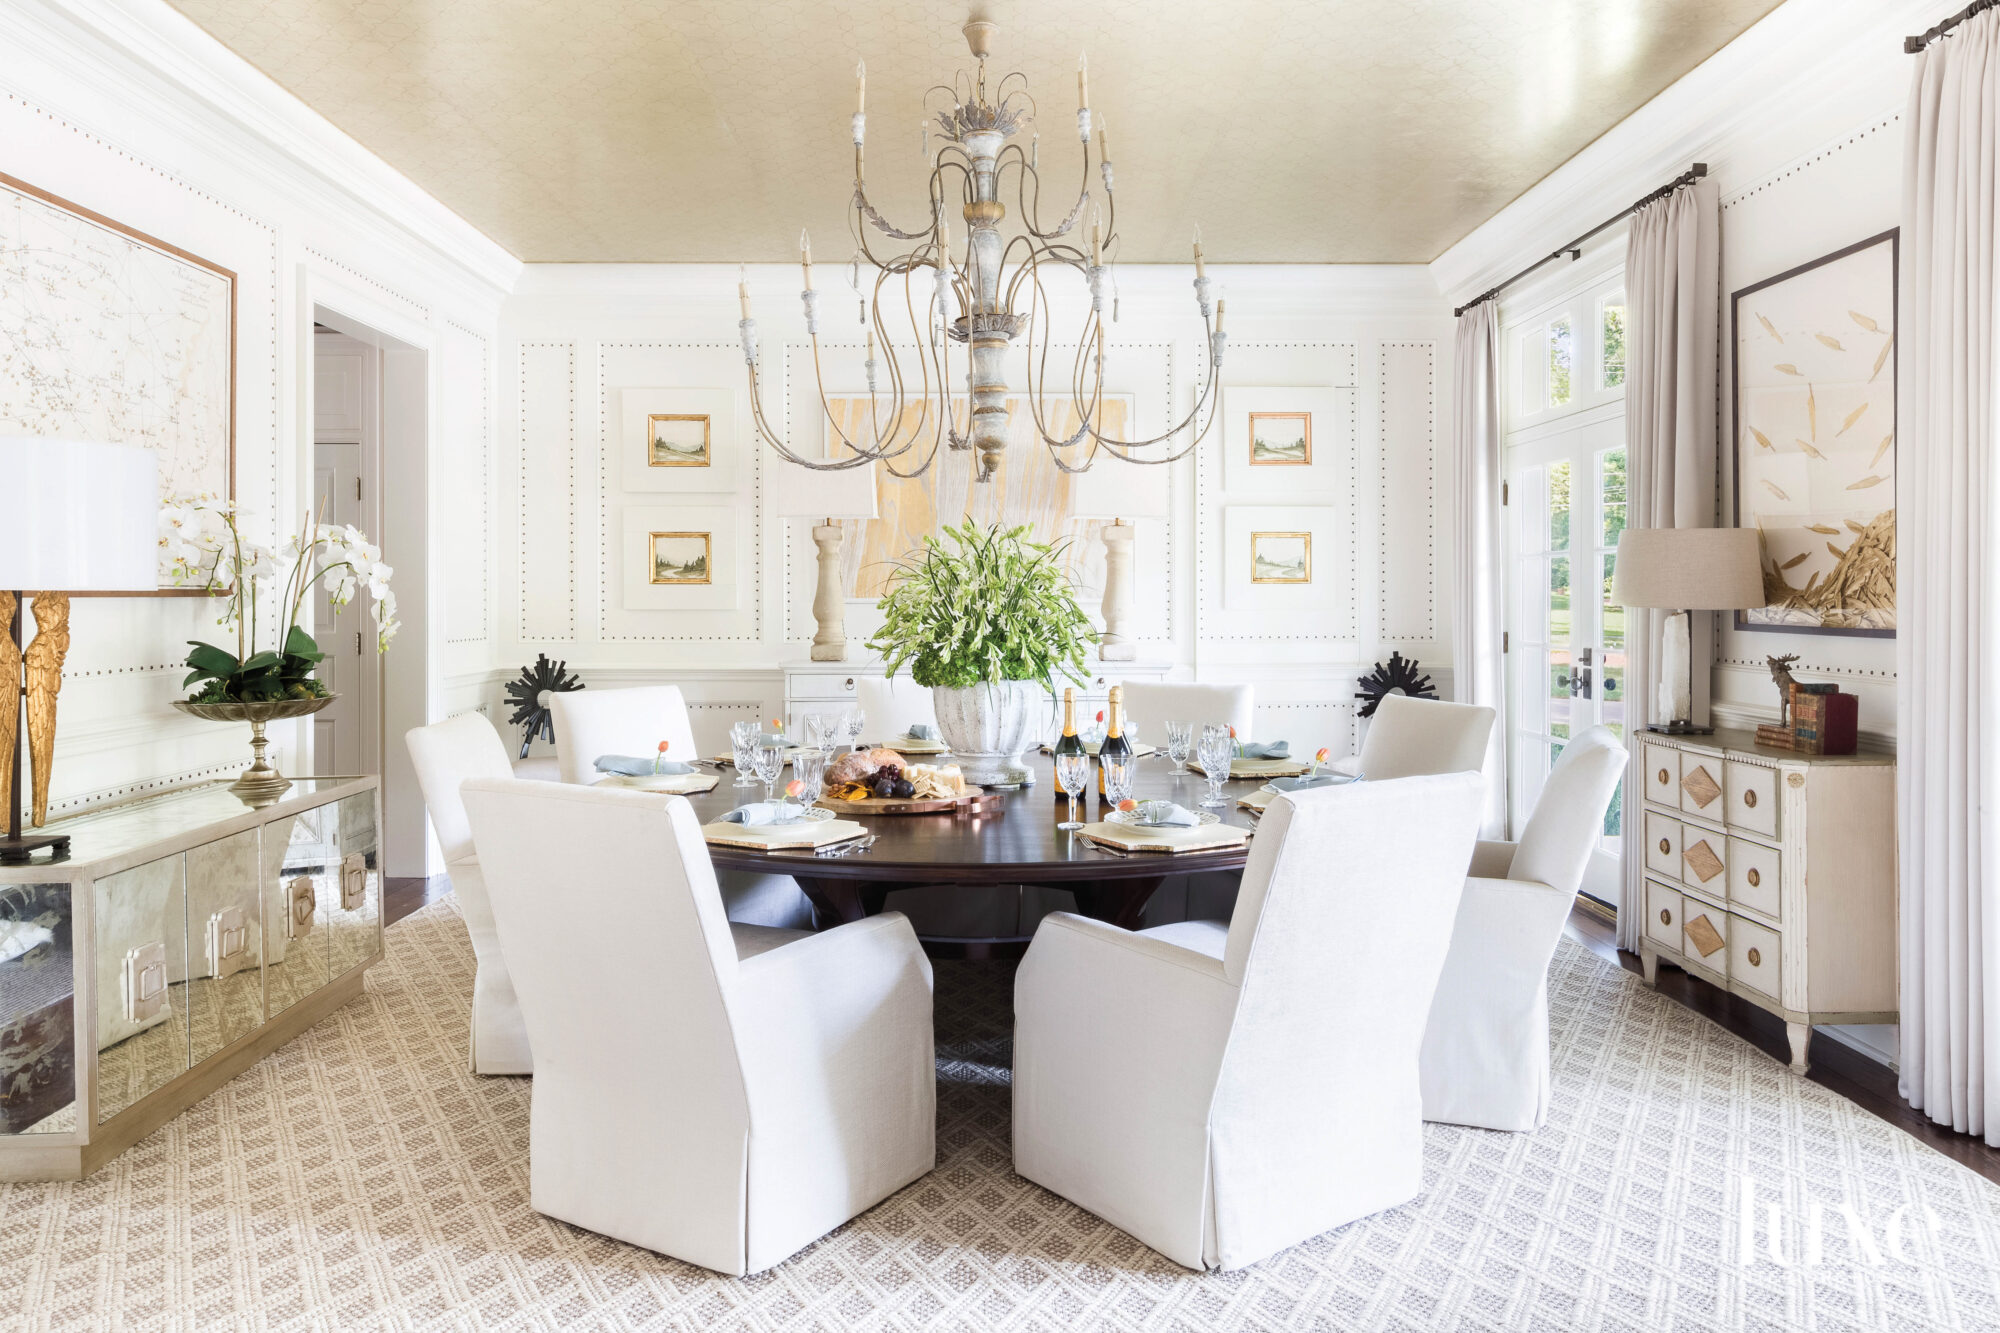 Dining room with metallic ceiling, oversize chandelier and slipcovered dining chairs surrounding a round table